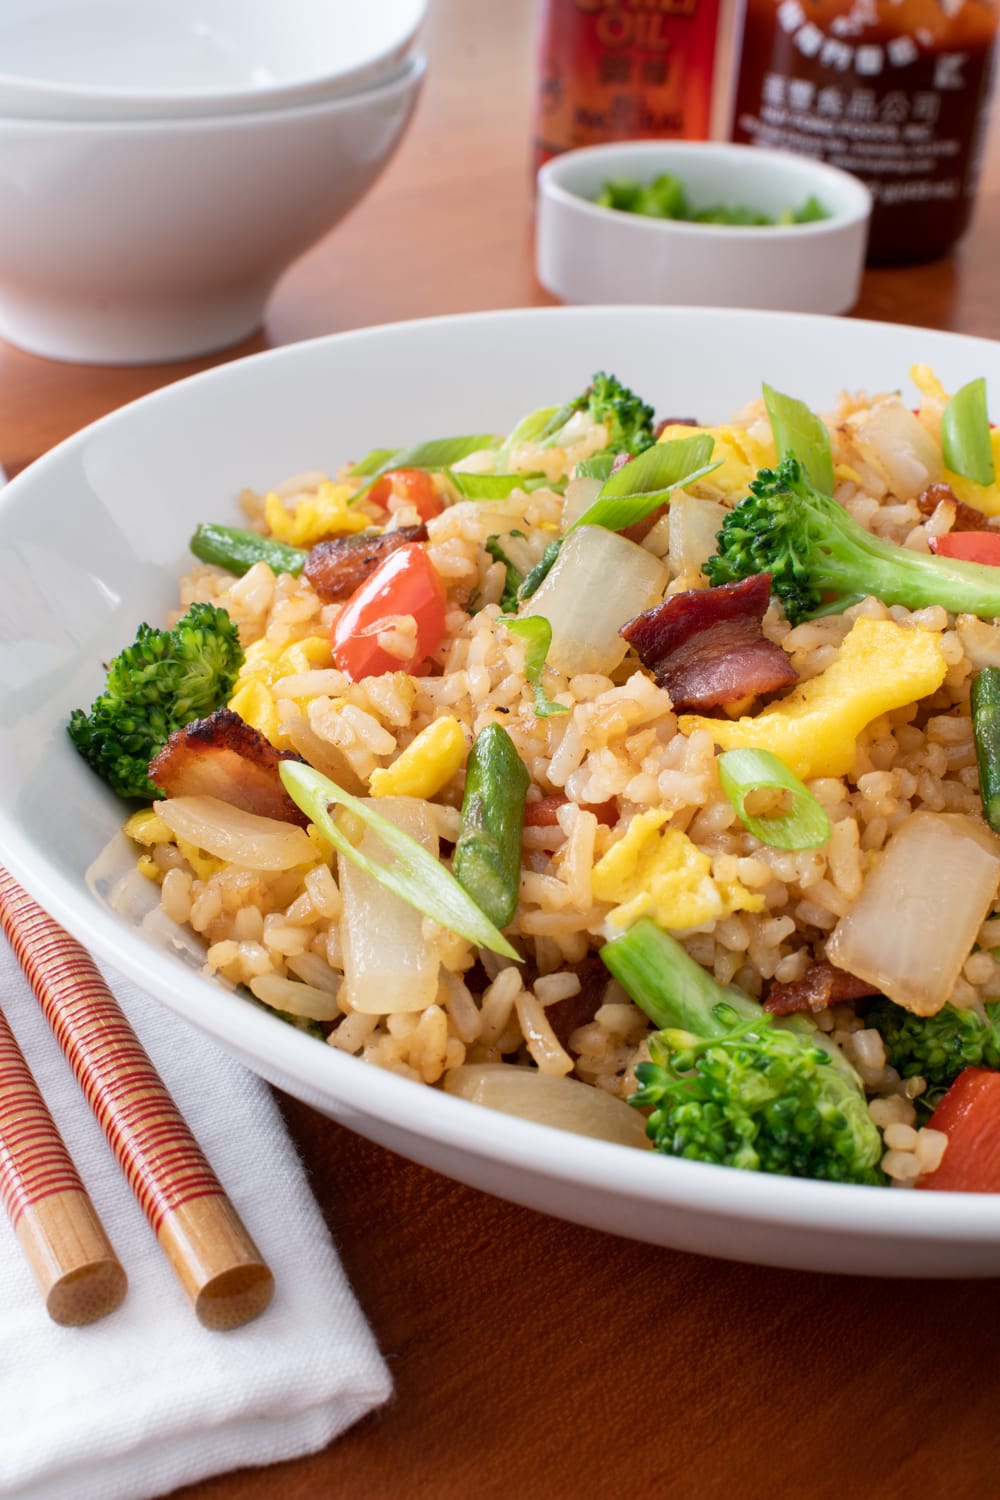 Vegetable Fried Rice with Bacon